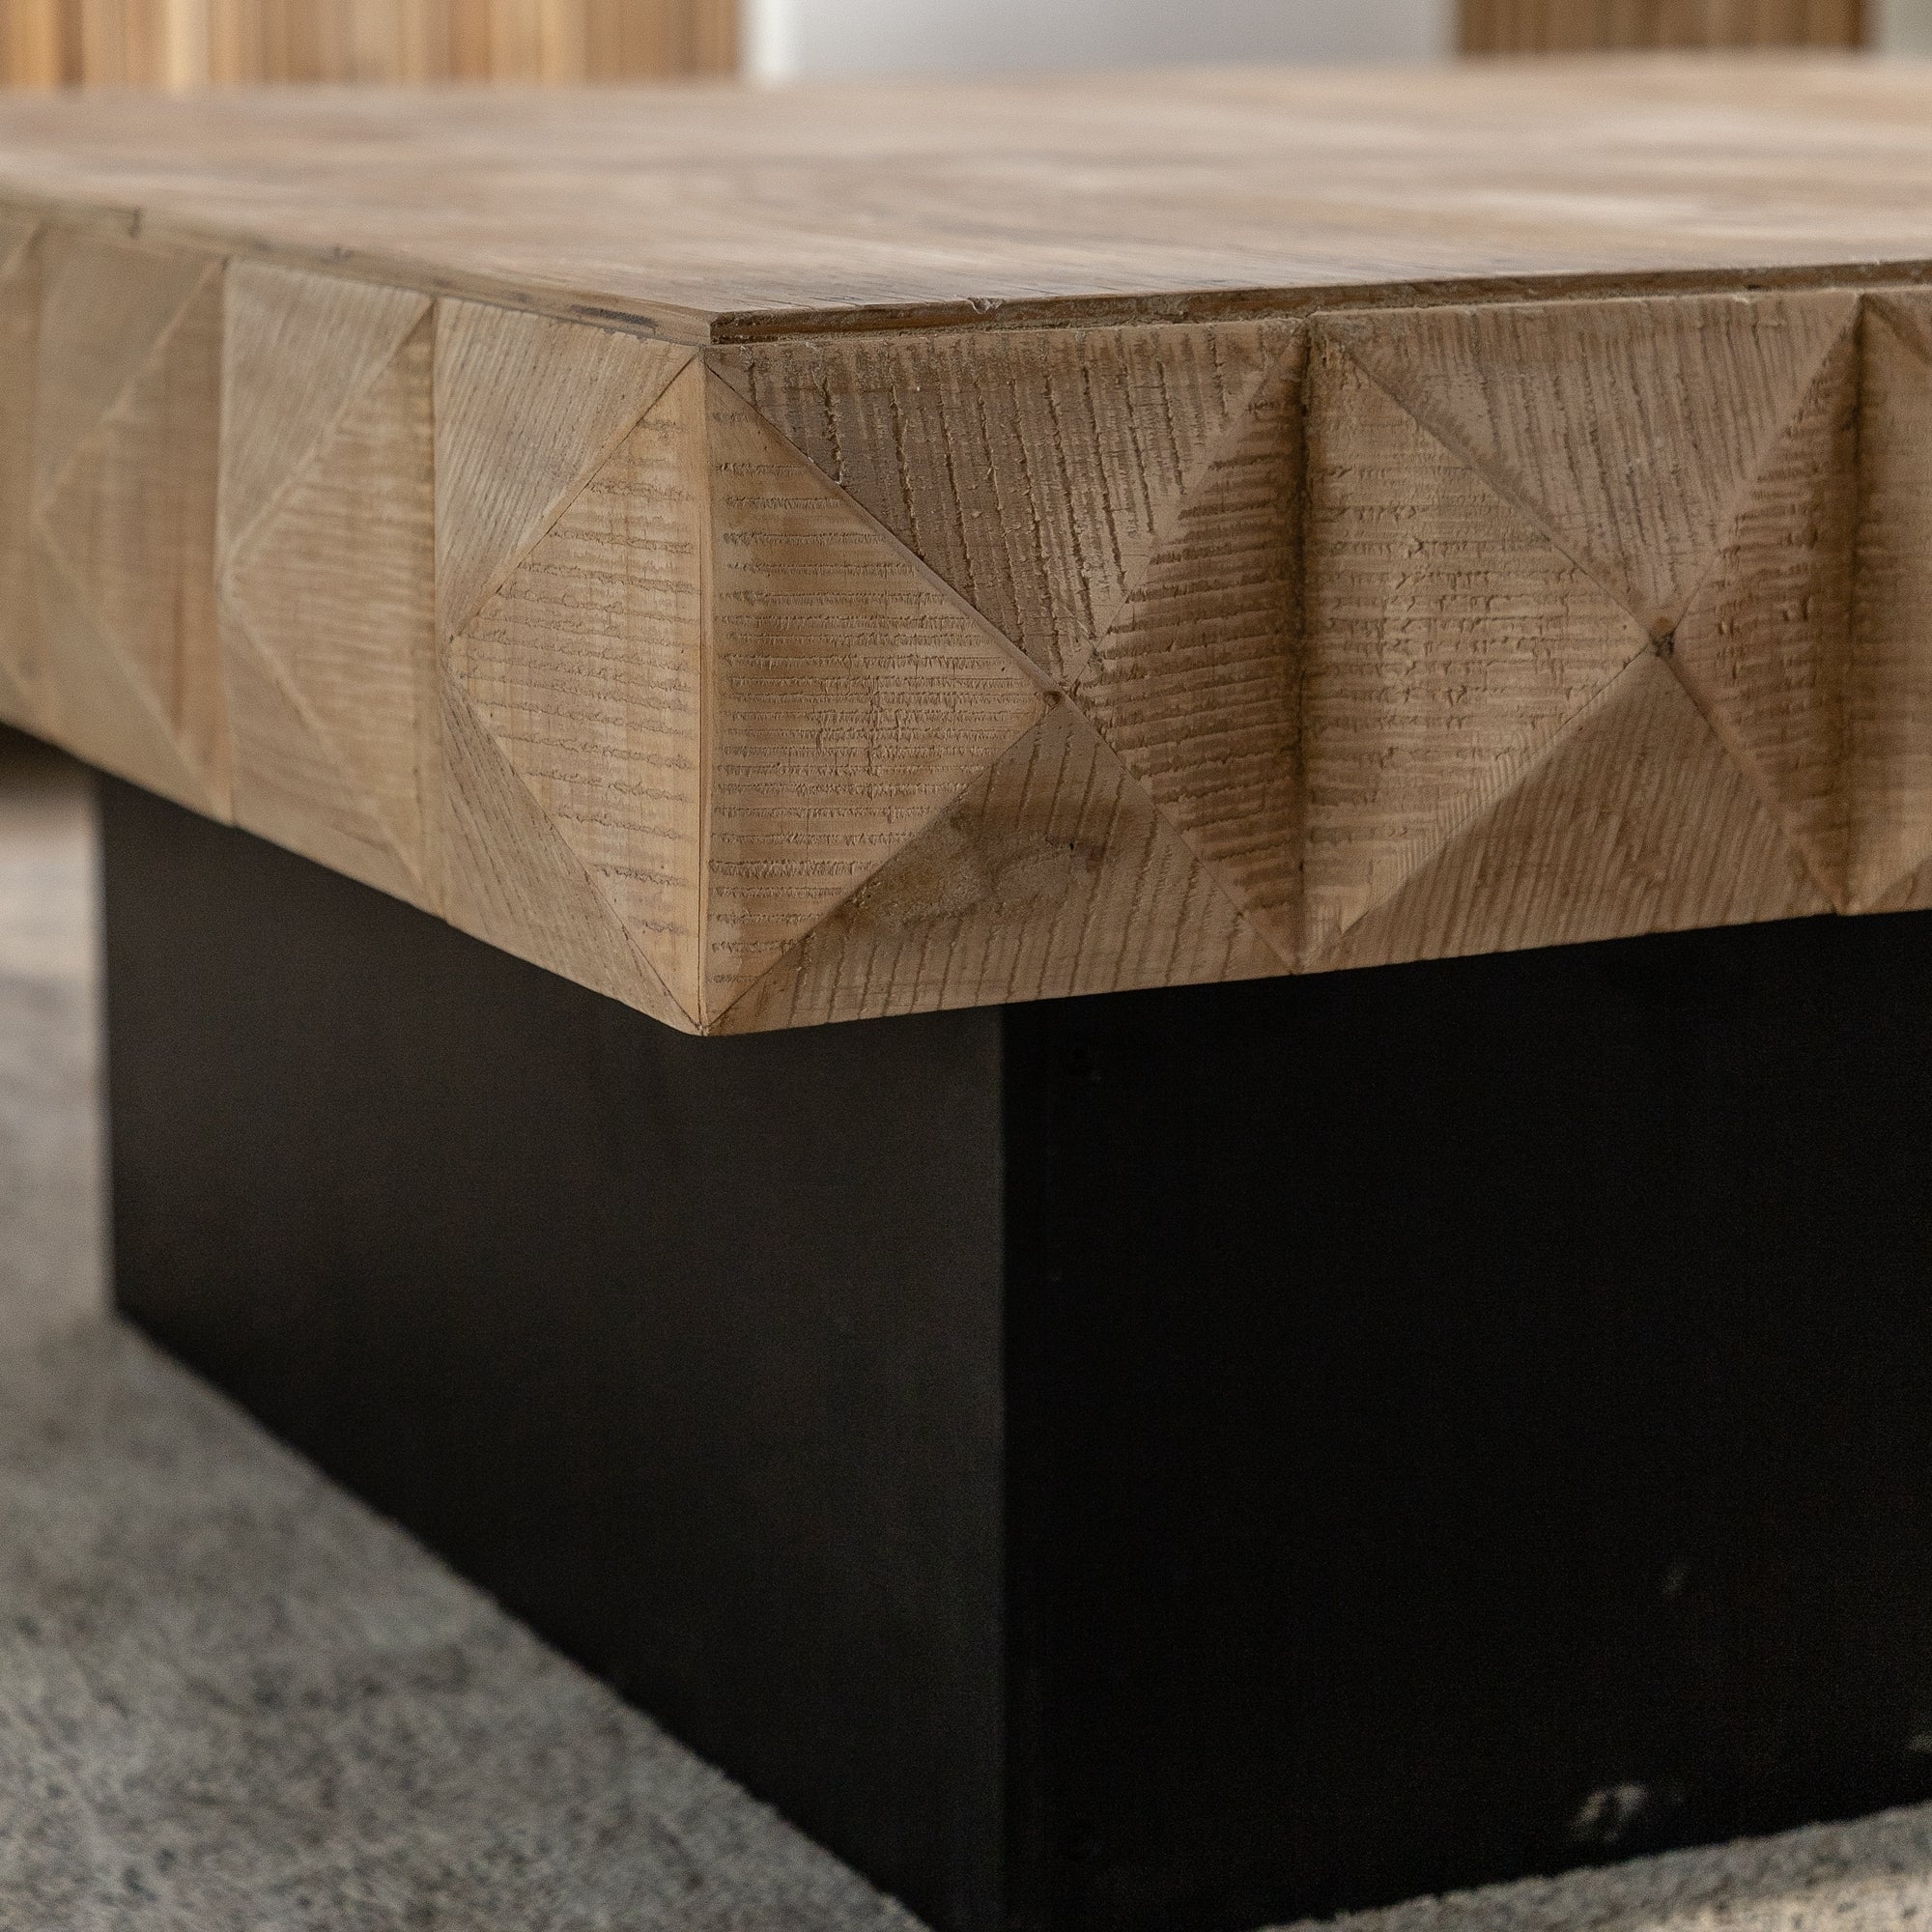 Three-dimensional Embossed Pattern Square Retro Coffee Table - Natural